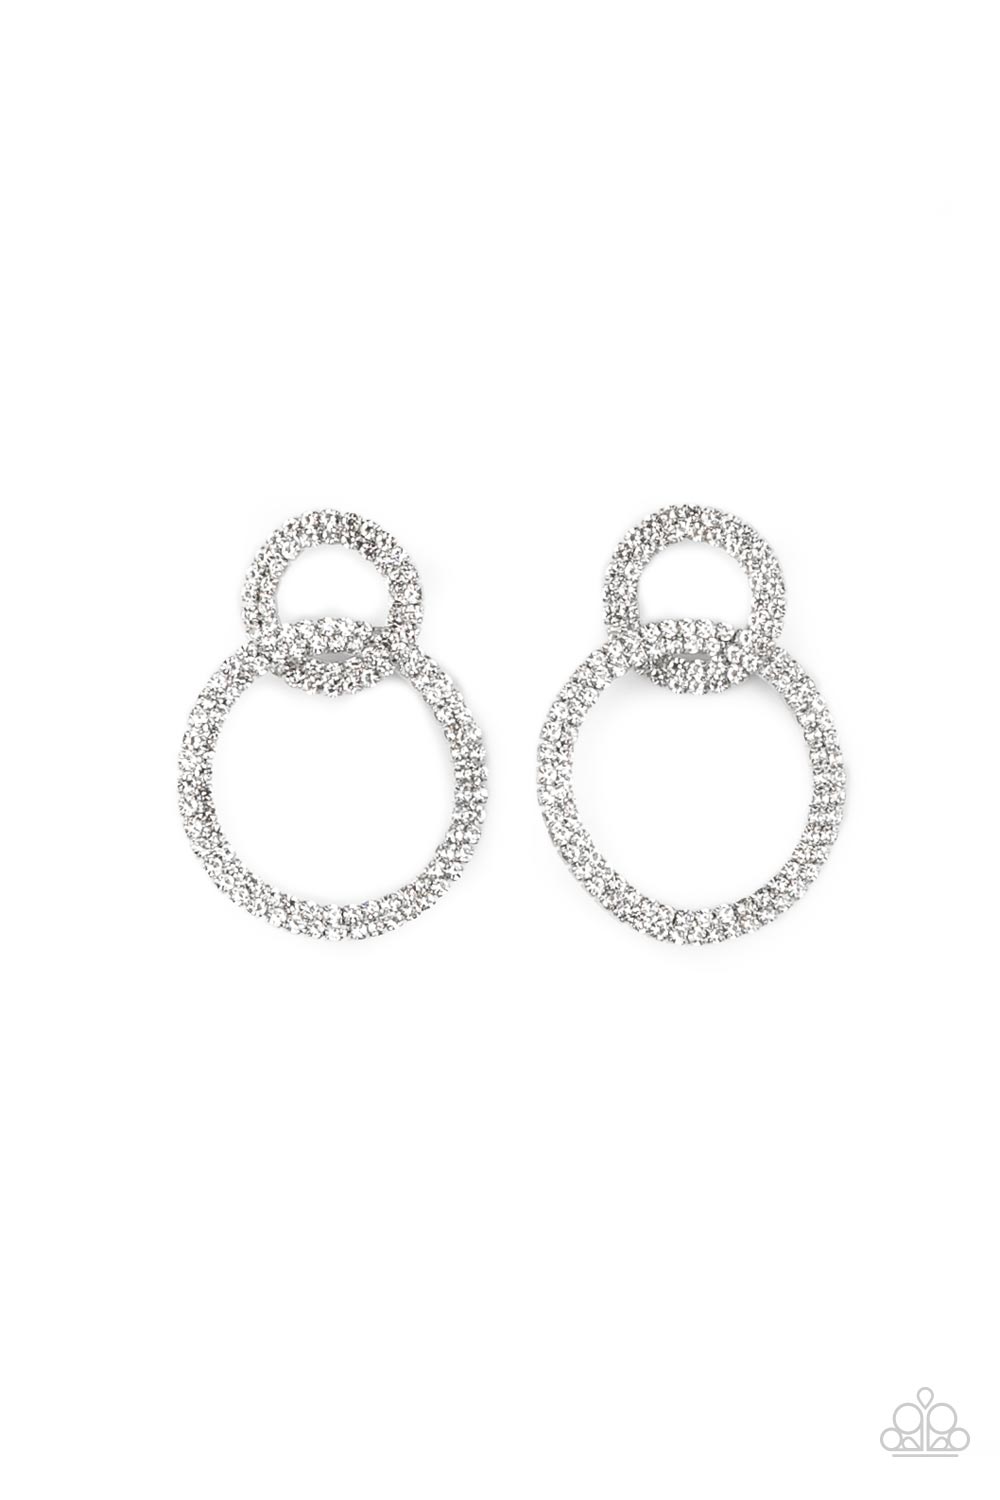 Paparazzi ♥ Intensely Icy - White ♥ Post Earrings